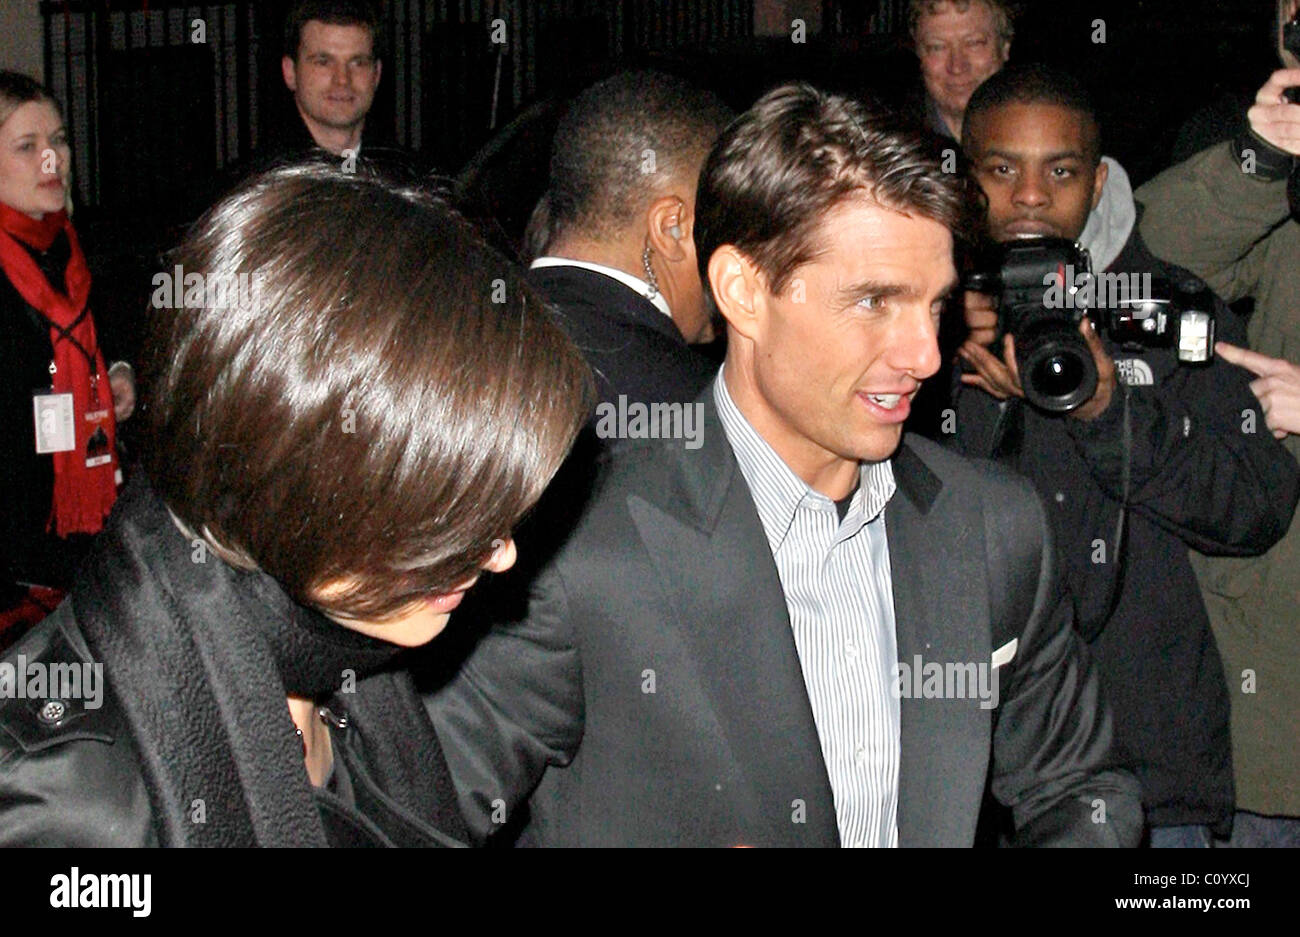 Tom Cruise and his wife Katie Holmes leave The Ivy restaurant, having spent over 2 hours dining inside. The pair smiled and Stock Photo